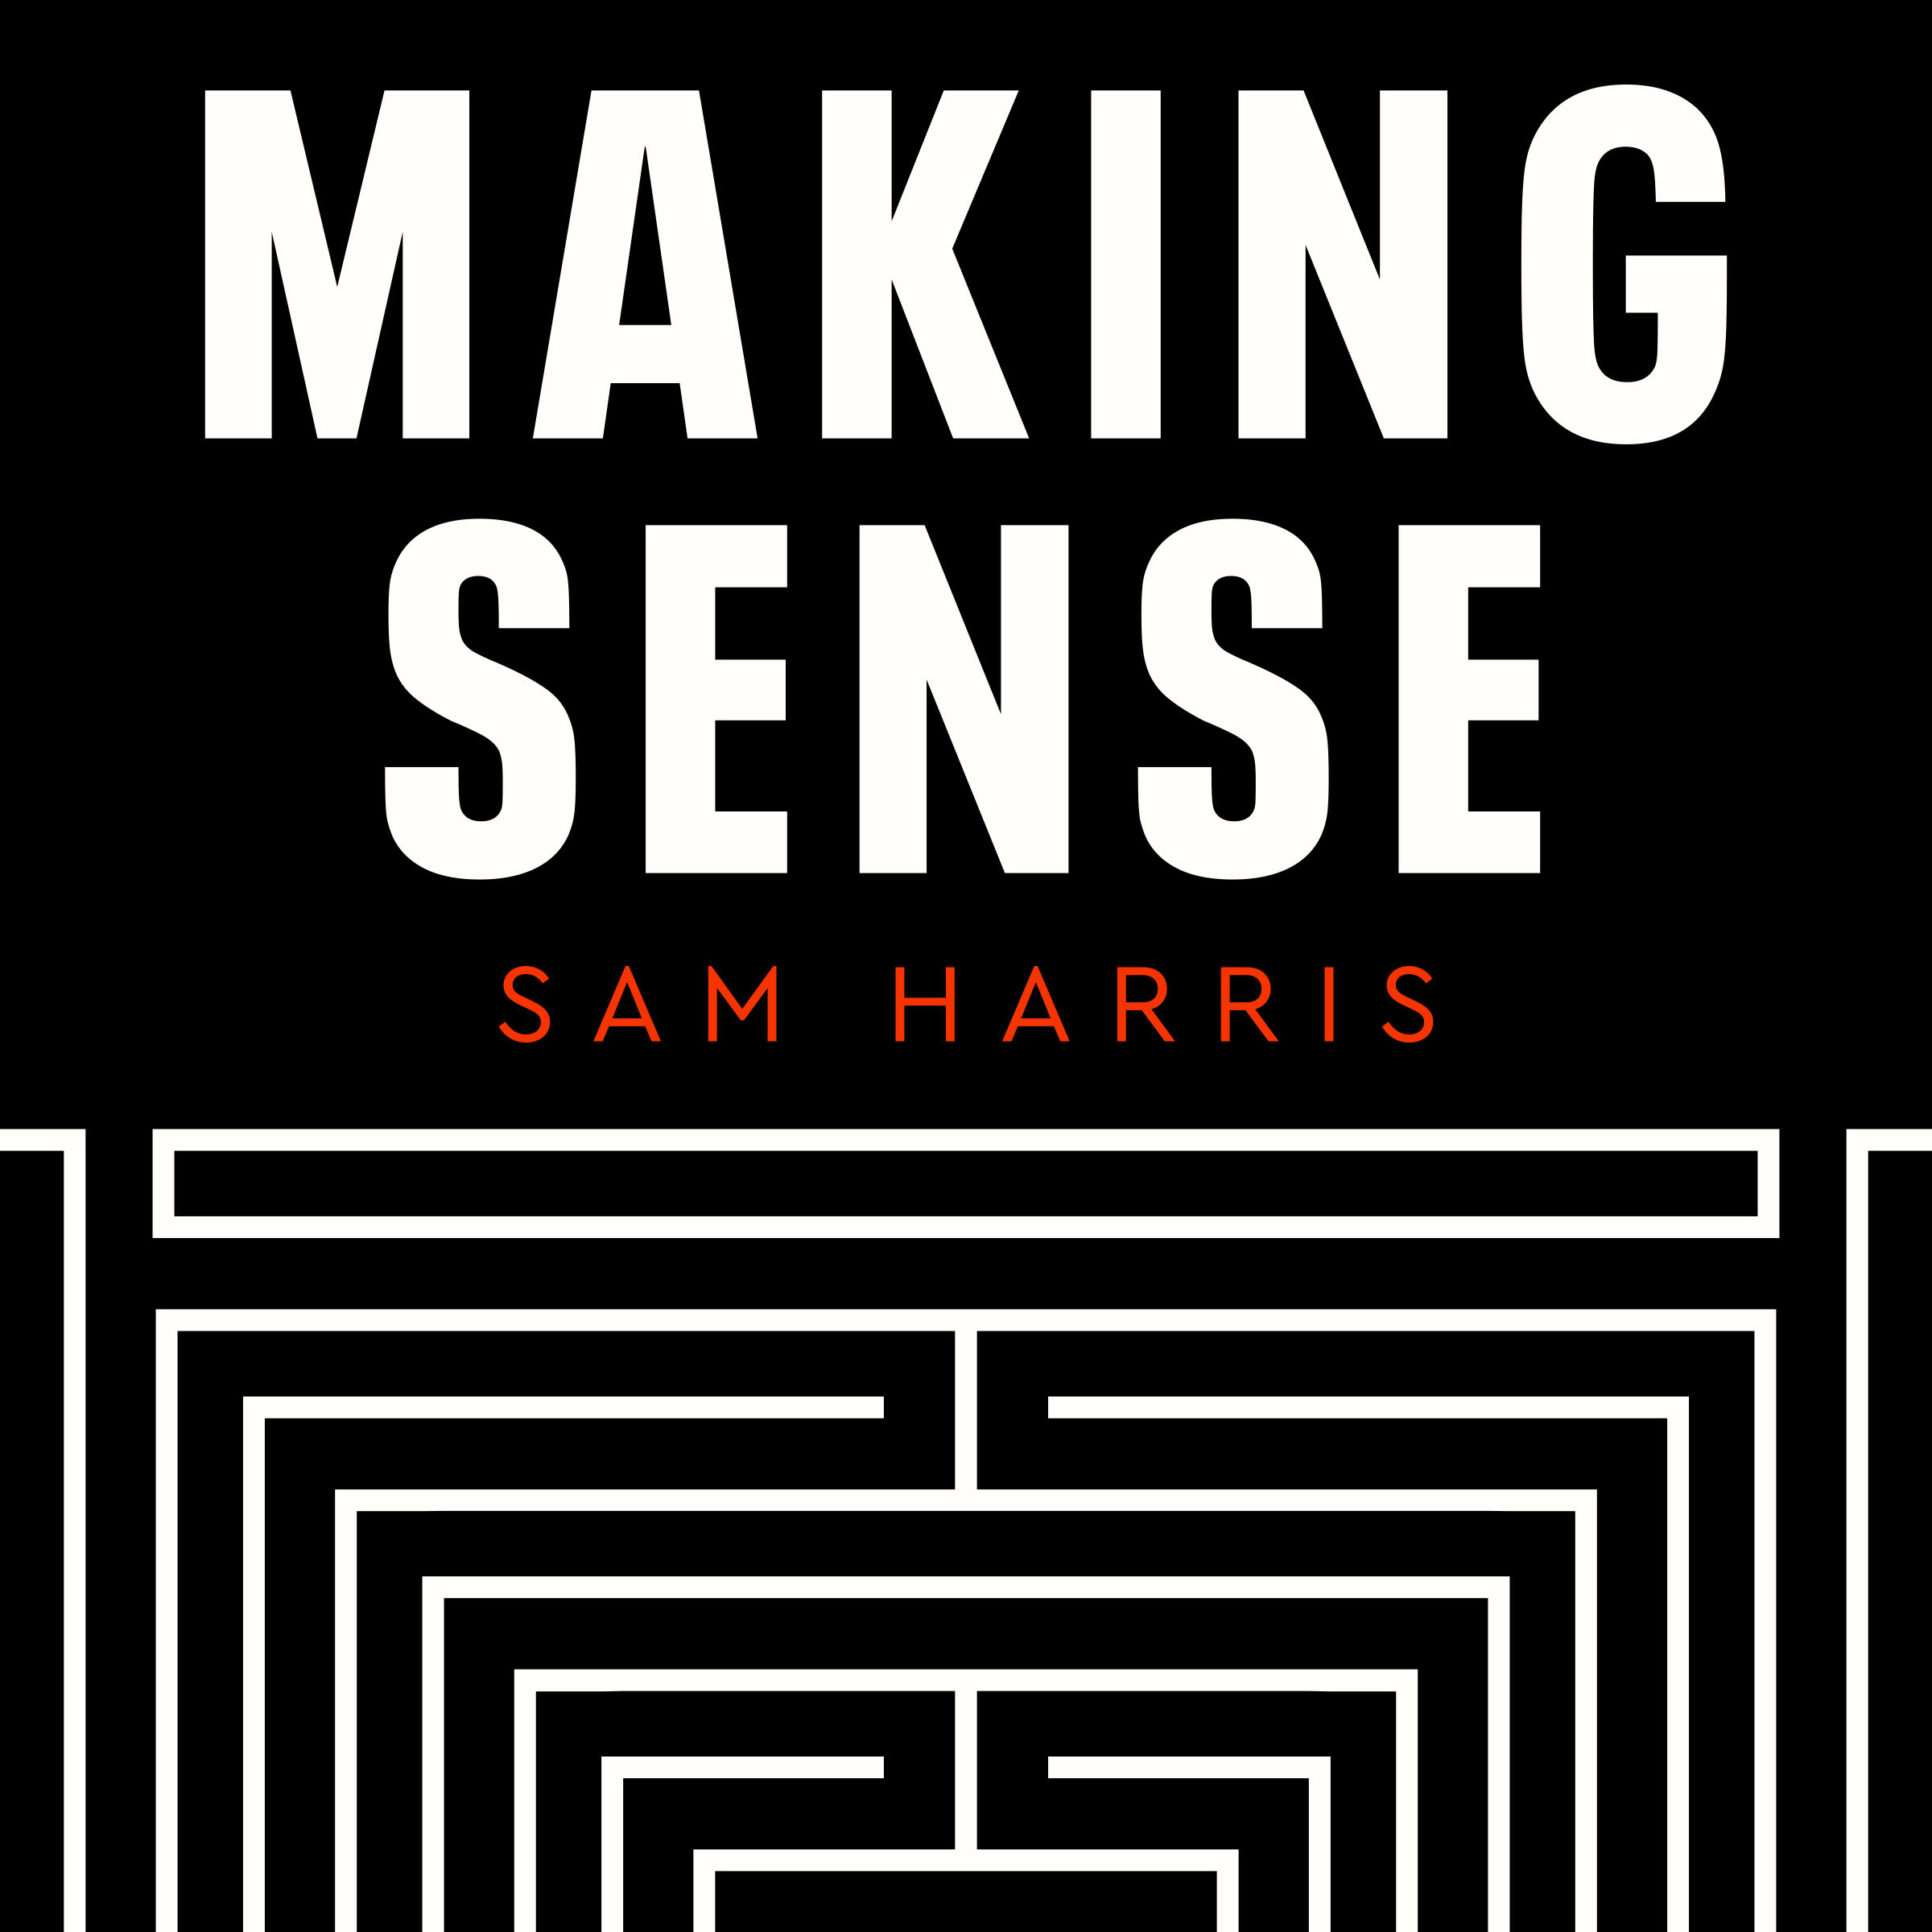 Sam Harris is Changing the Name of His Podcast From "Waking Up" to "Making Sense"